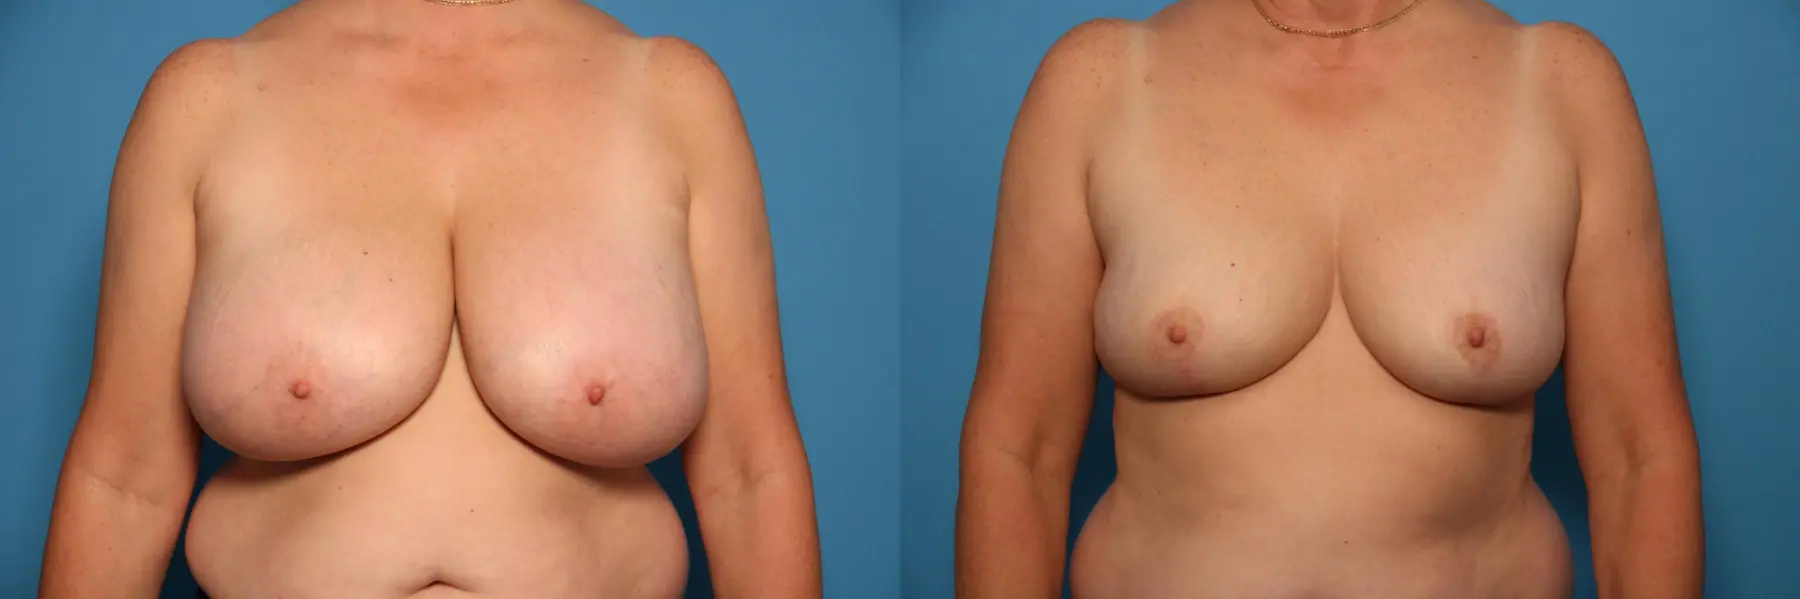 Breast Lift-Reduction: Patient 14 - Before and After  